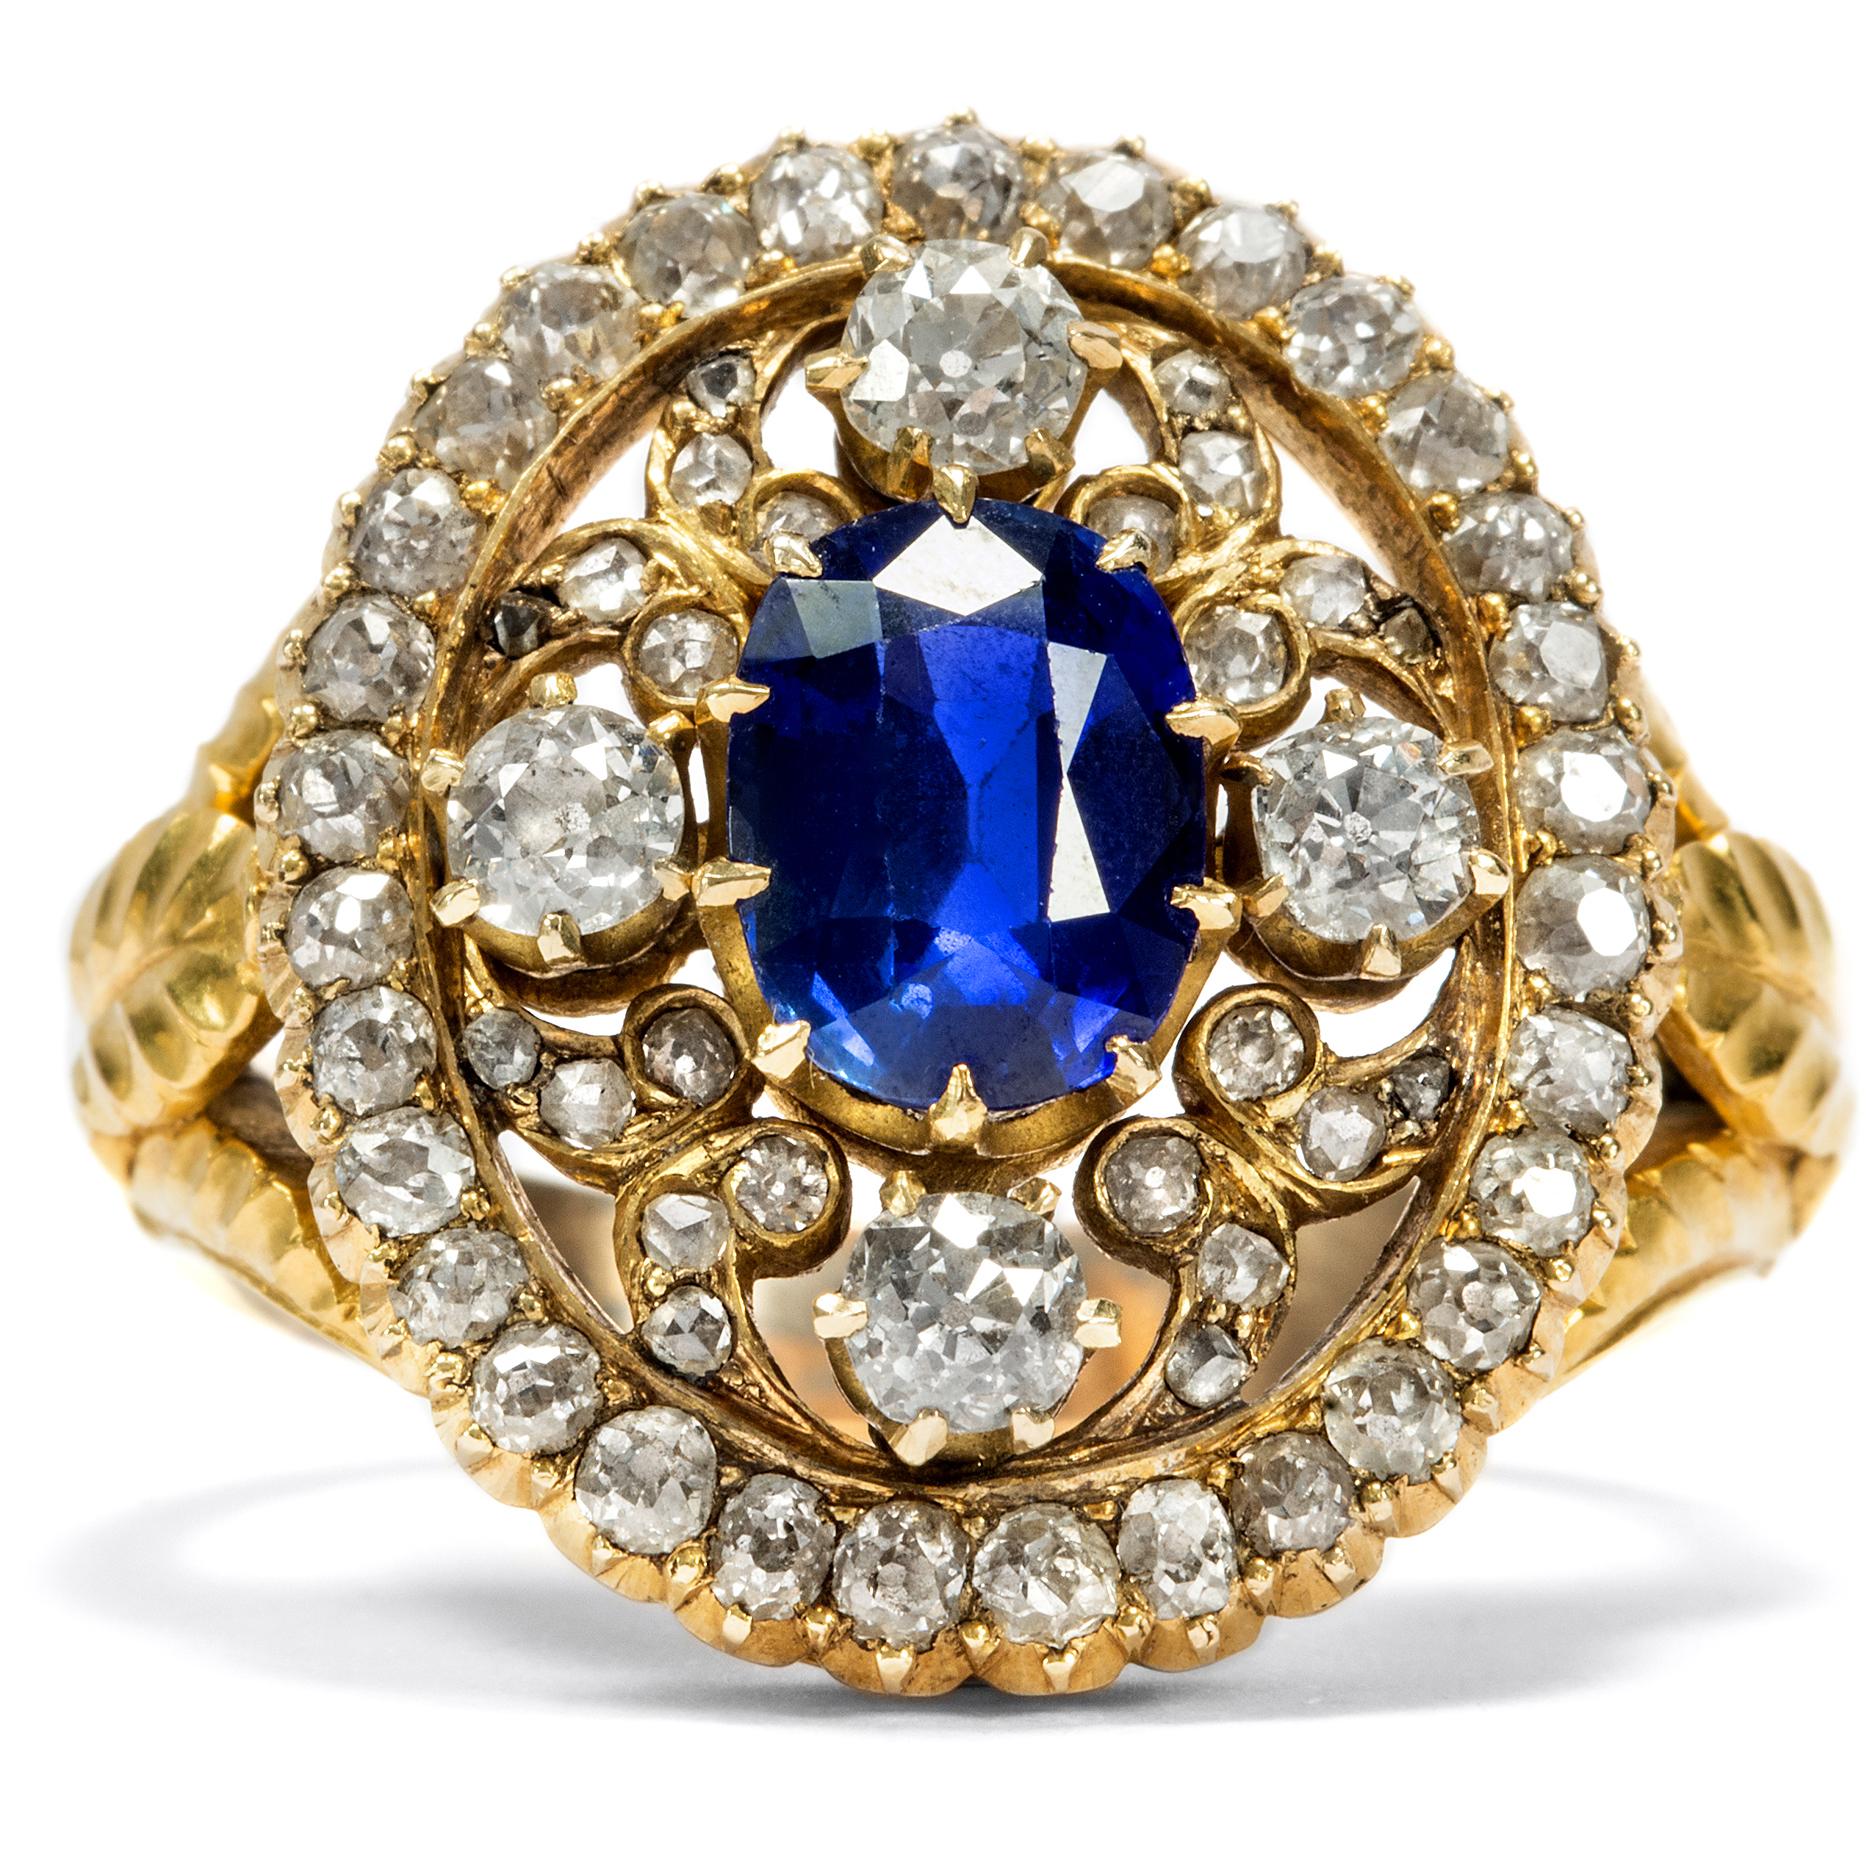 Nowadays, the jewellery market is predominantly tailored towards women; precious jewels for gentlemen are harder to find than ever. In previous centuries, however, it was entirely common for gentlemen to adorn their hands with gemstones. A suite of